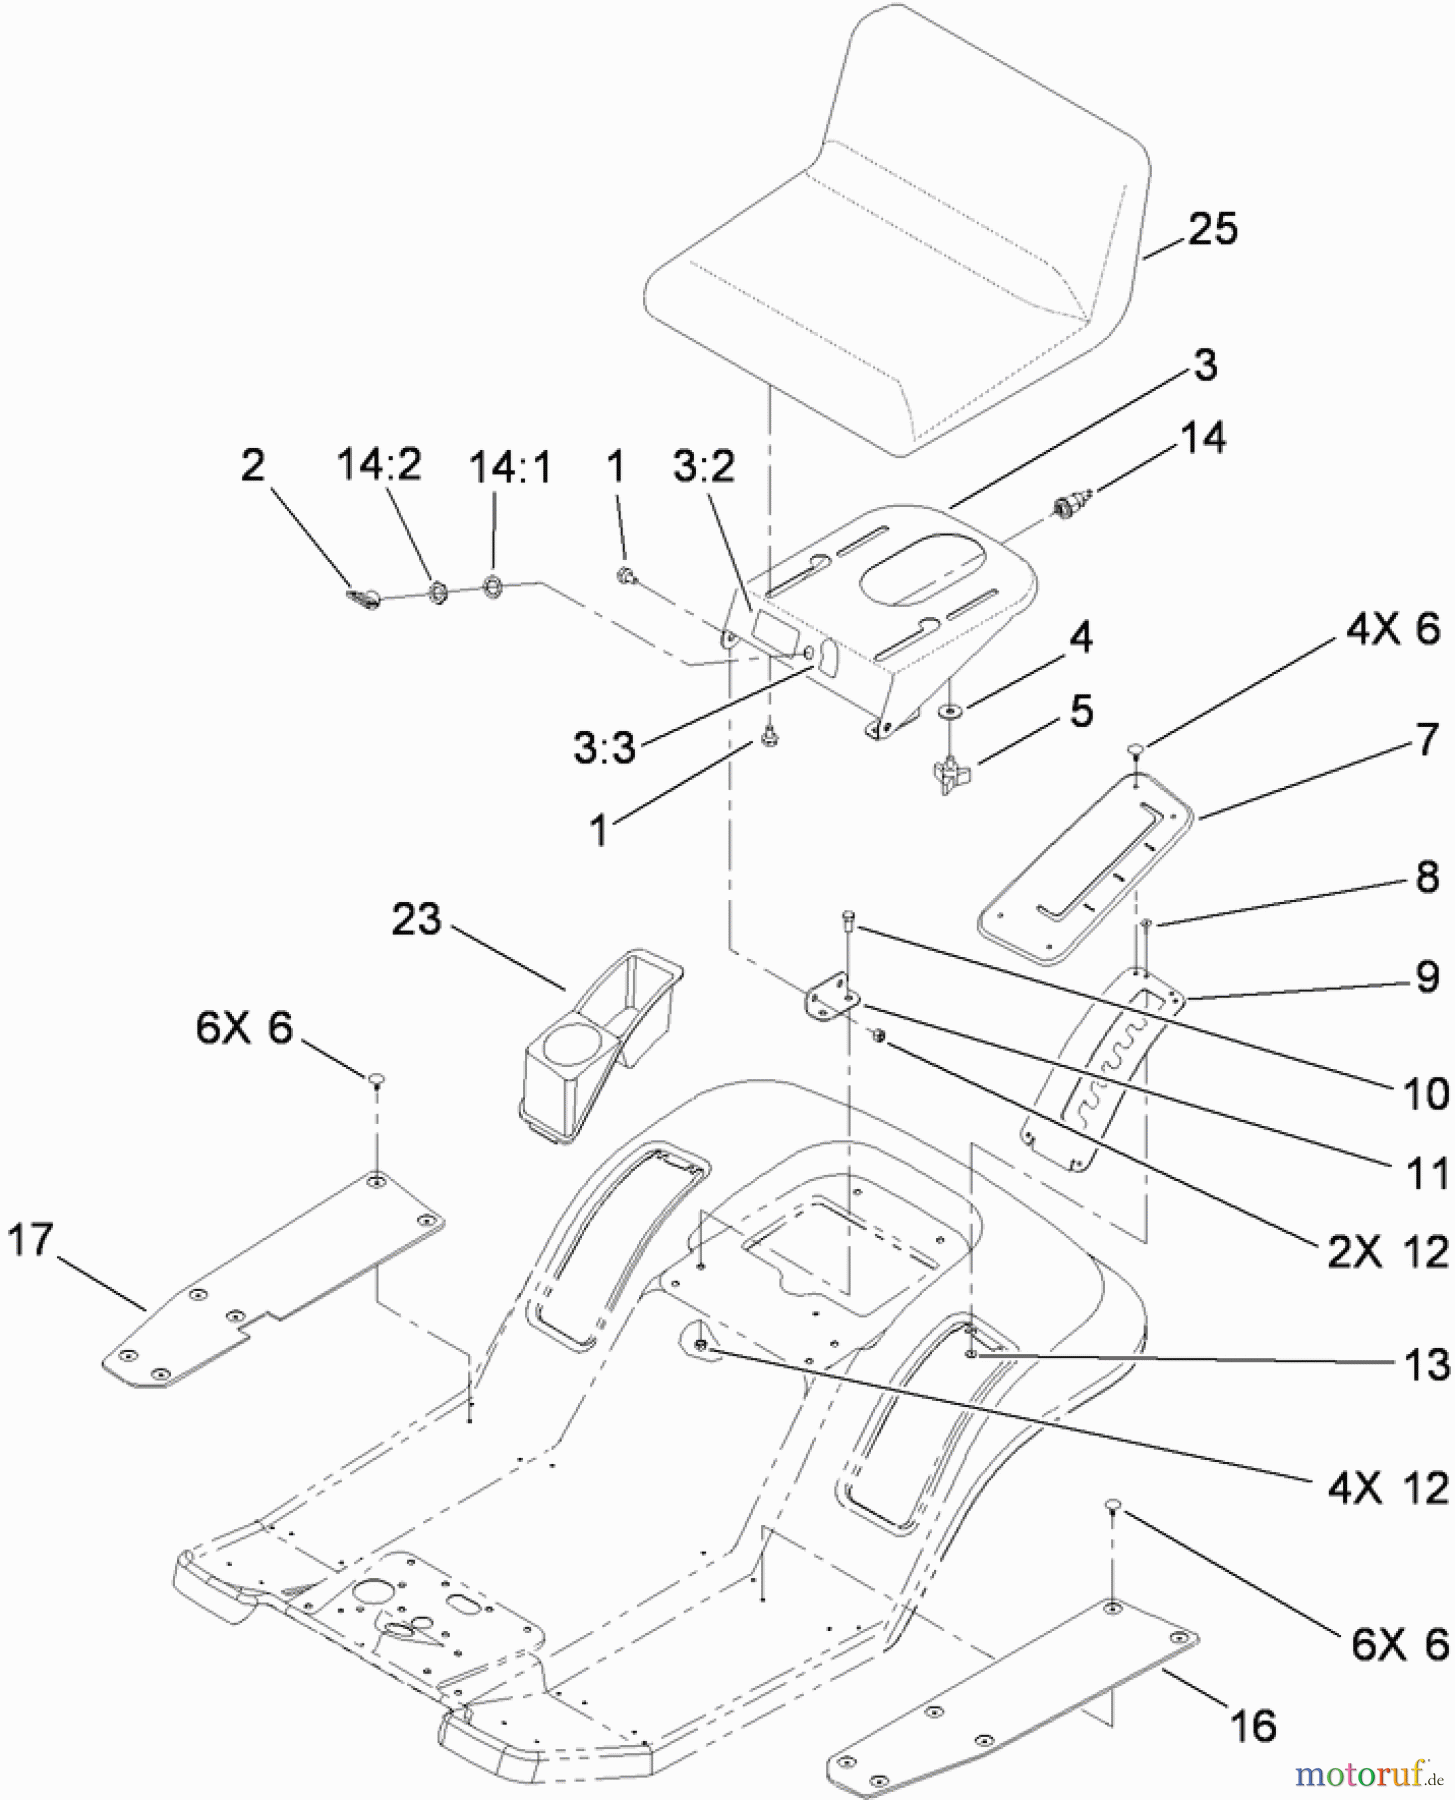  Toro Neu Mowers, Lawn & Garden Tractor Seite 1 71252 (XL 380H) - Toro XL 380H Lawn Tractor, 2010 (310000001-310002000) REAR BODY AND SEAT ASSEMBLY